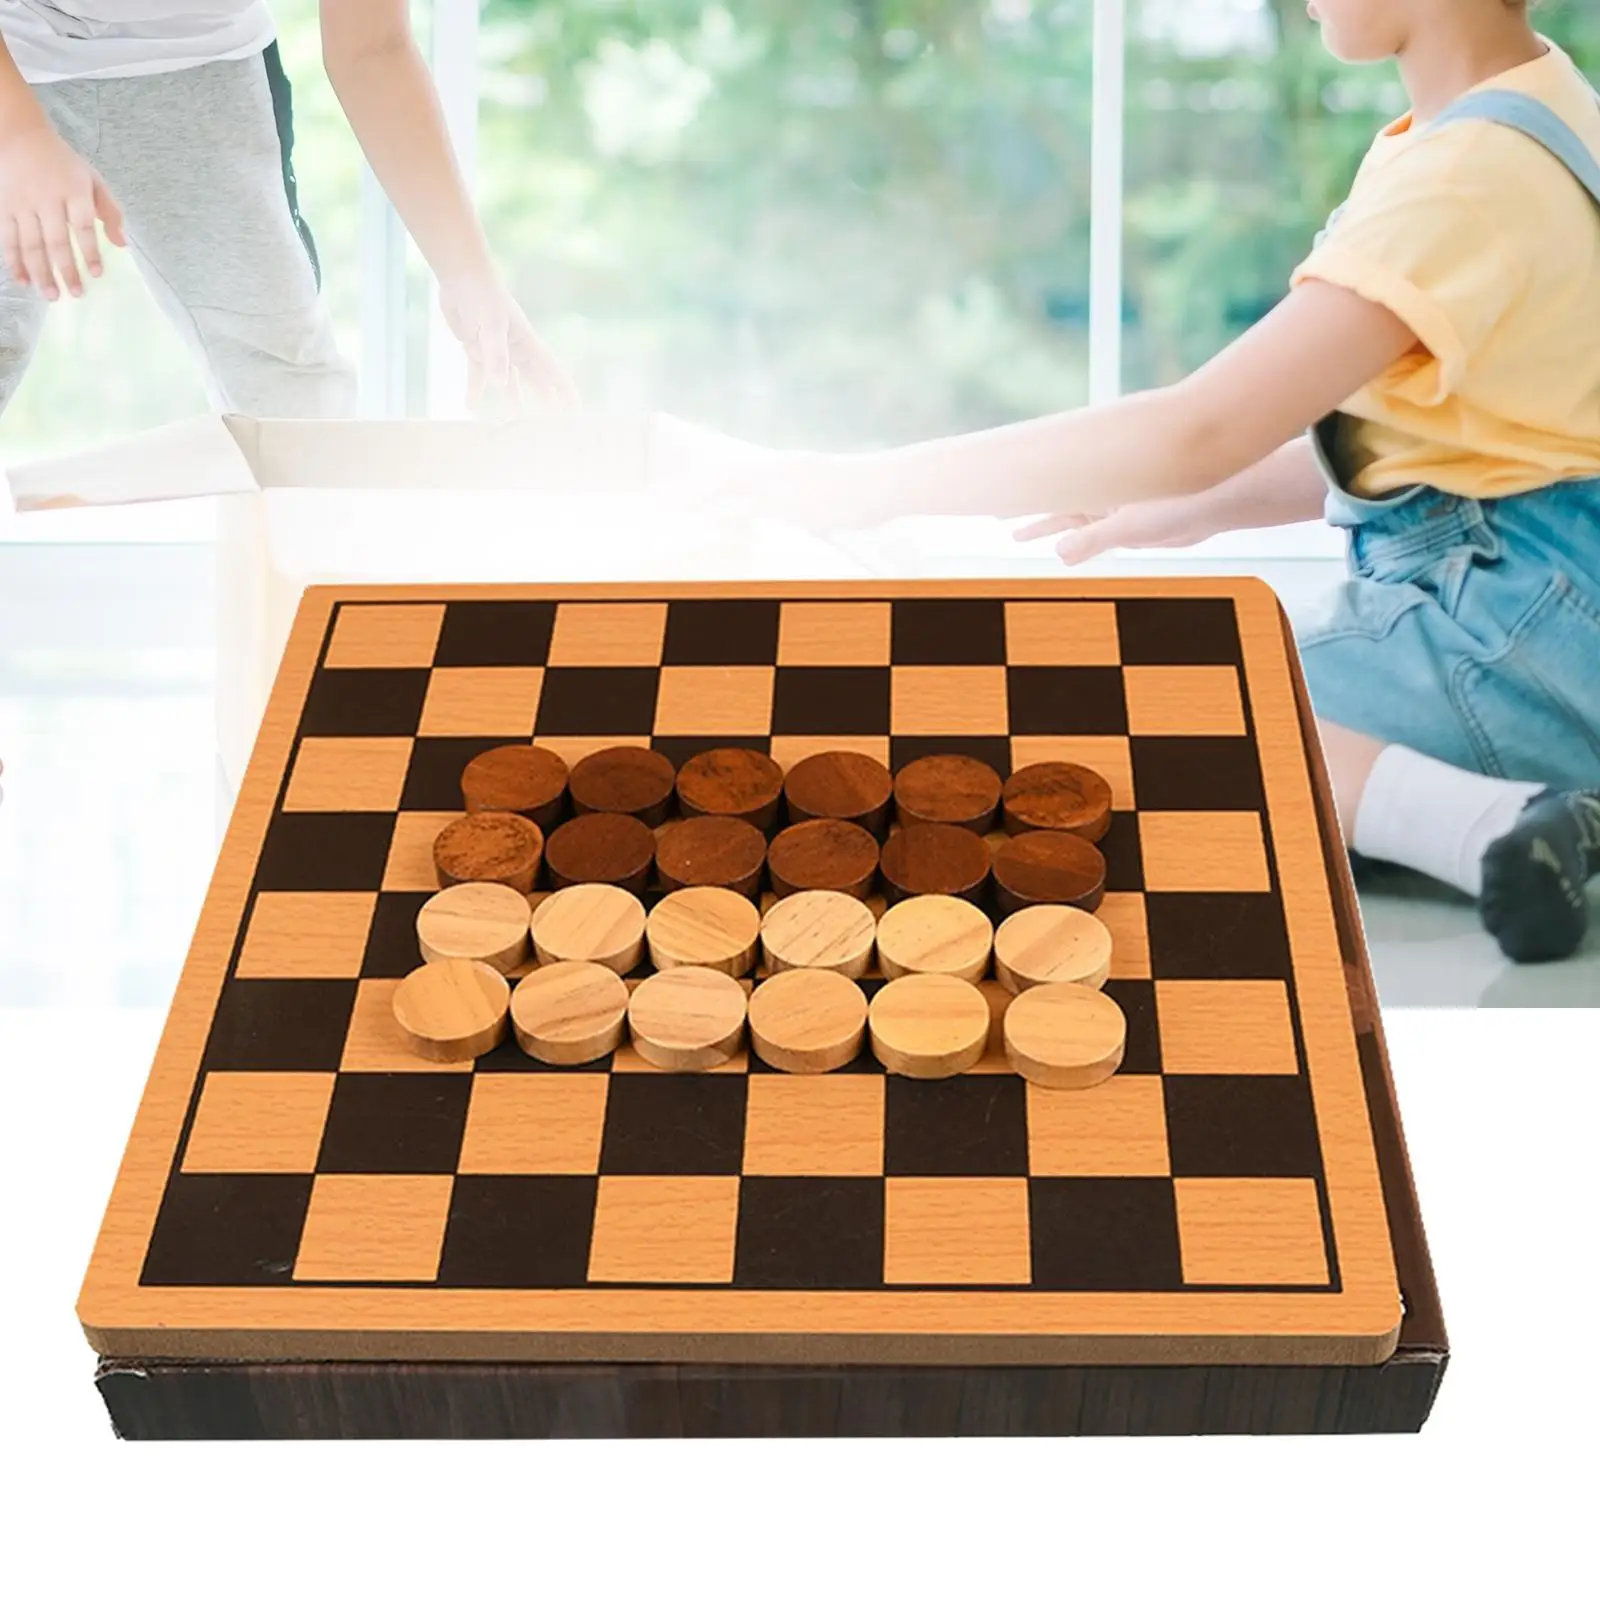 International Chess Game Set Accessories Decorative Ornament Early Education Toys Craft Figurine Wooden for Traveling Home Gifts